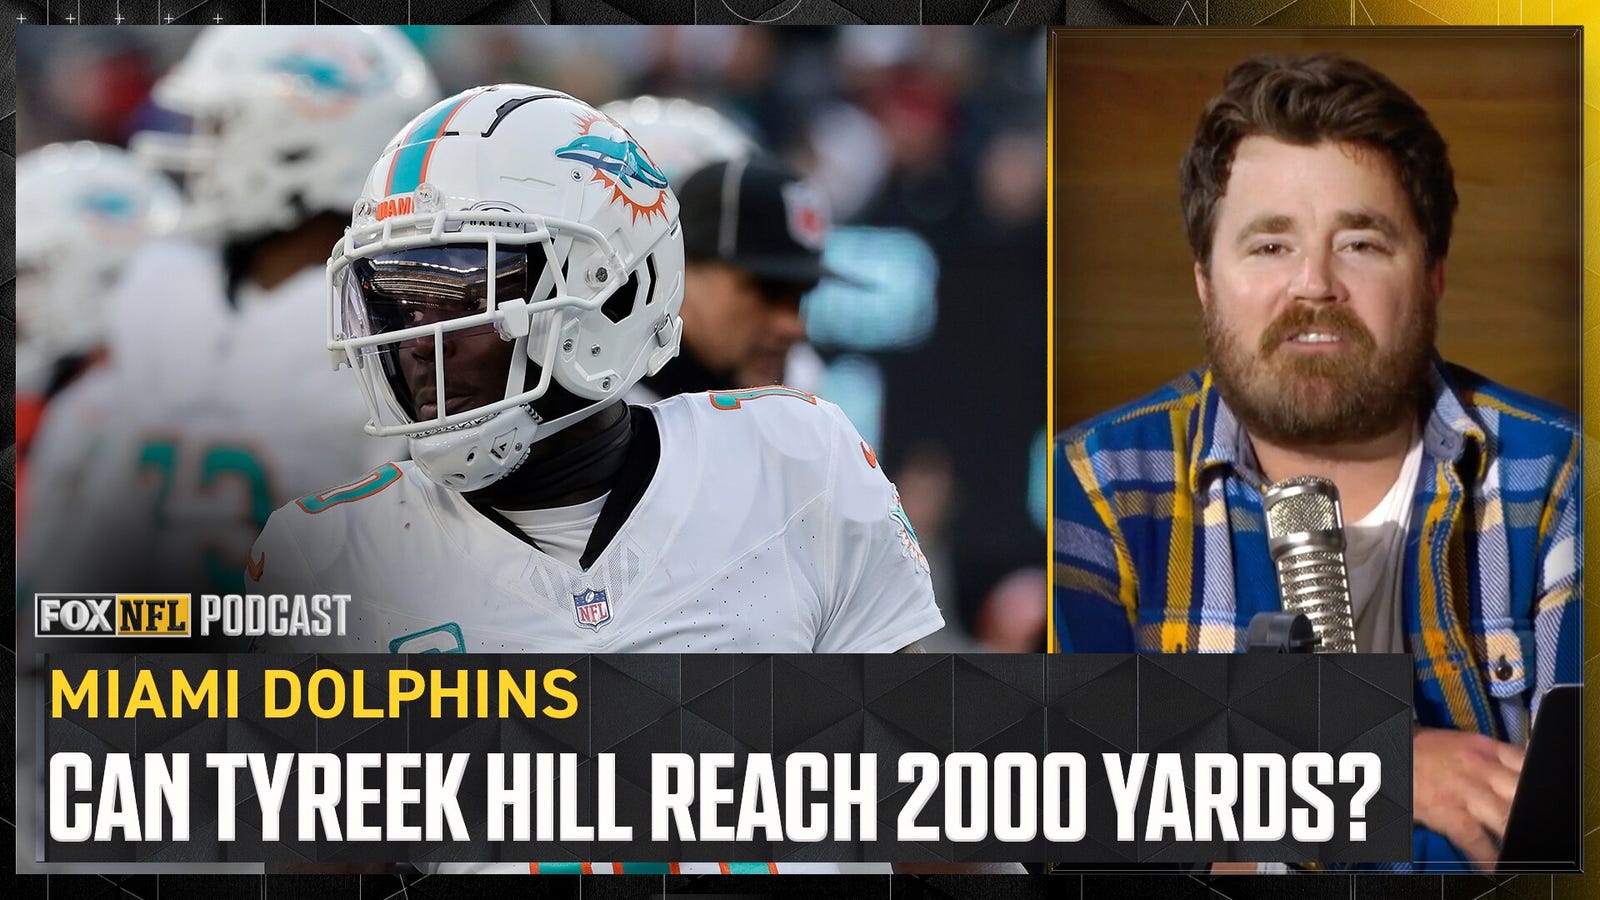 Can Tyreek Hill become the first NFL receiver to hit 2,000 yards?